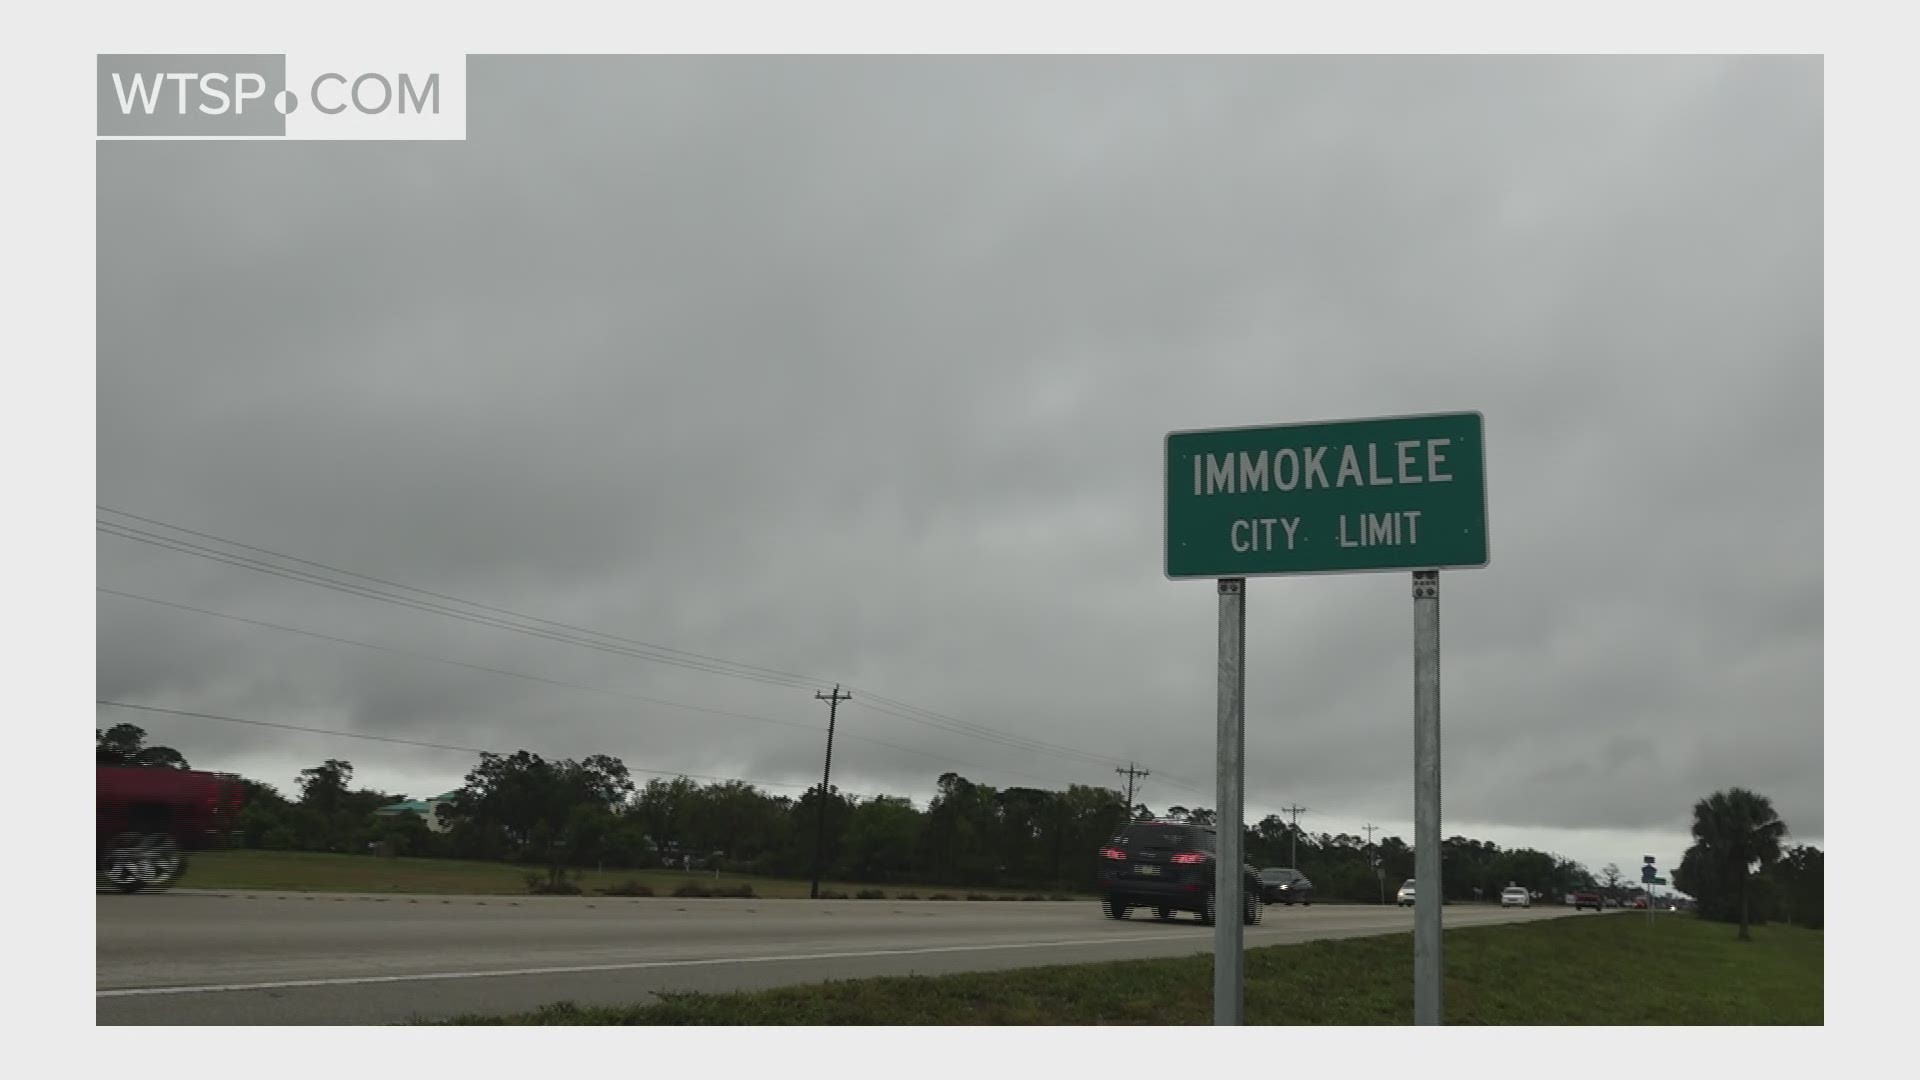 Getting the word out of what the rural town of Immokalee needed was a struggle. FULL STORY: https://on.wtsp.com/2WCvPQU